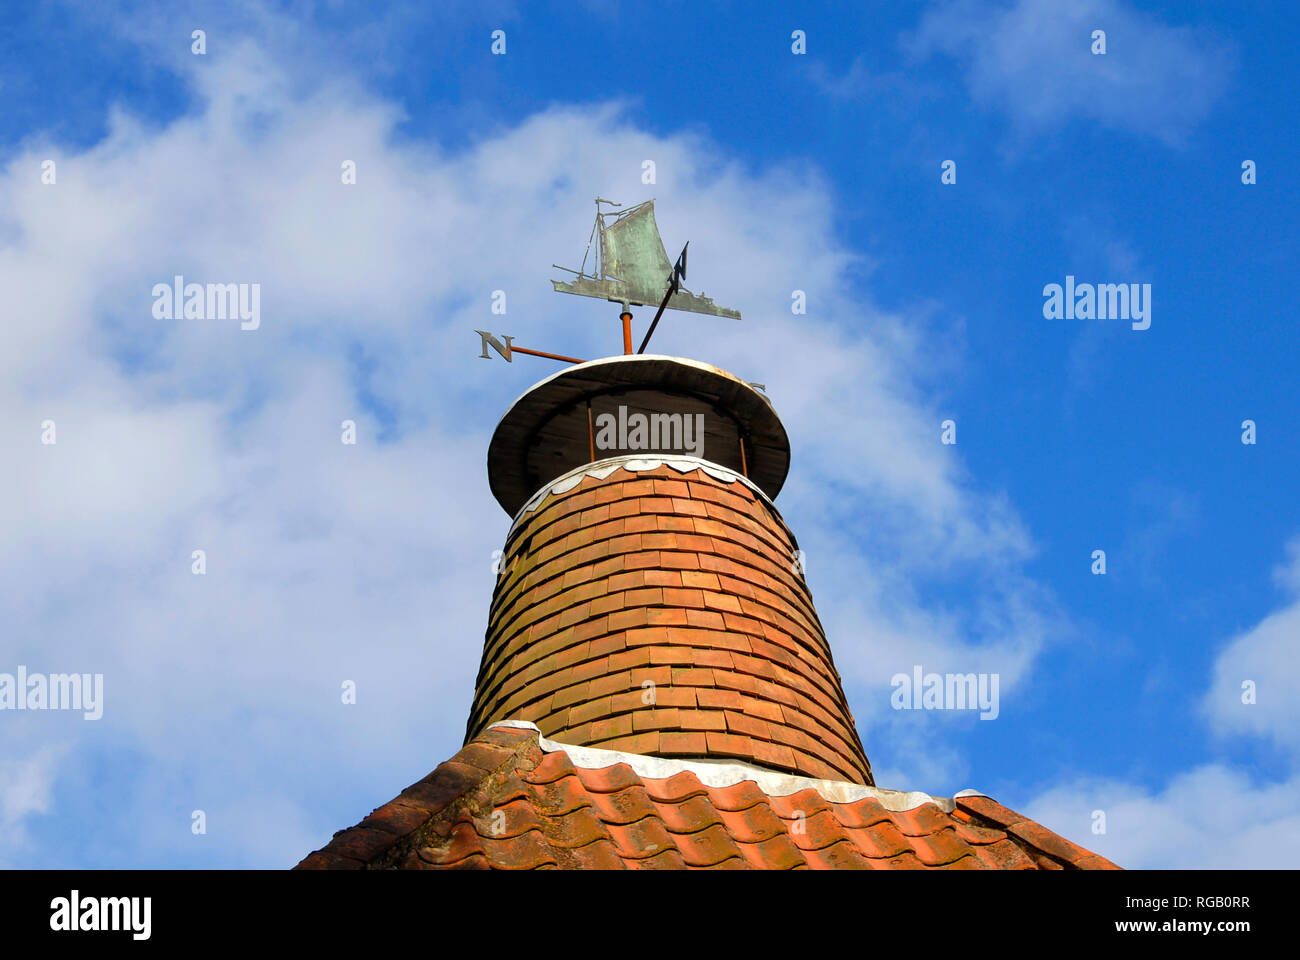 Chimney with weather vane on top in form of Norfolk wherry, Ludham, Norfolk, England Stock Photo